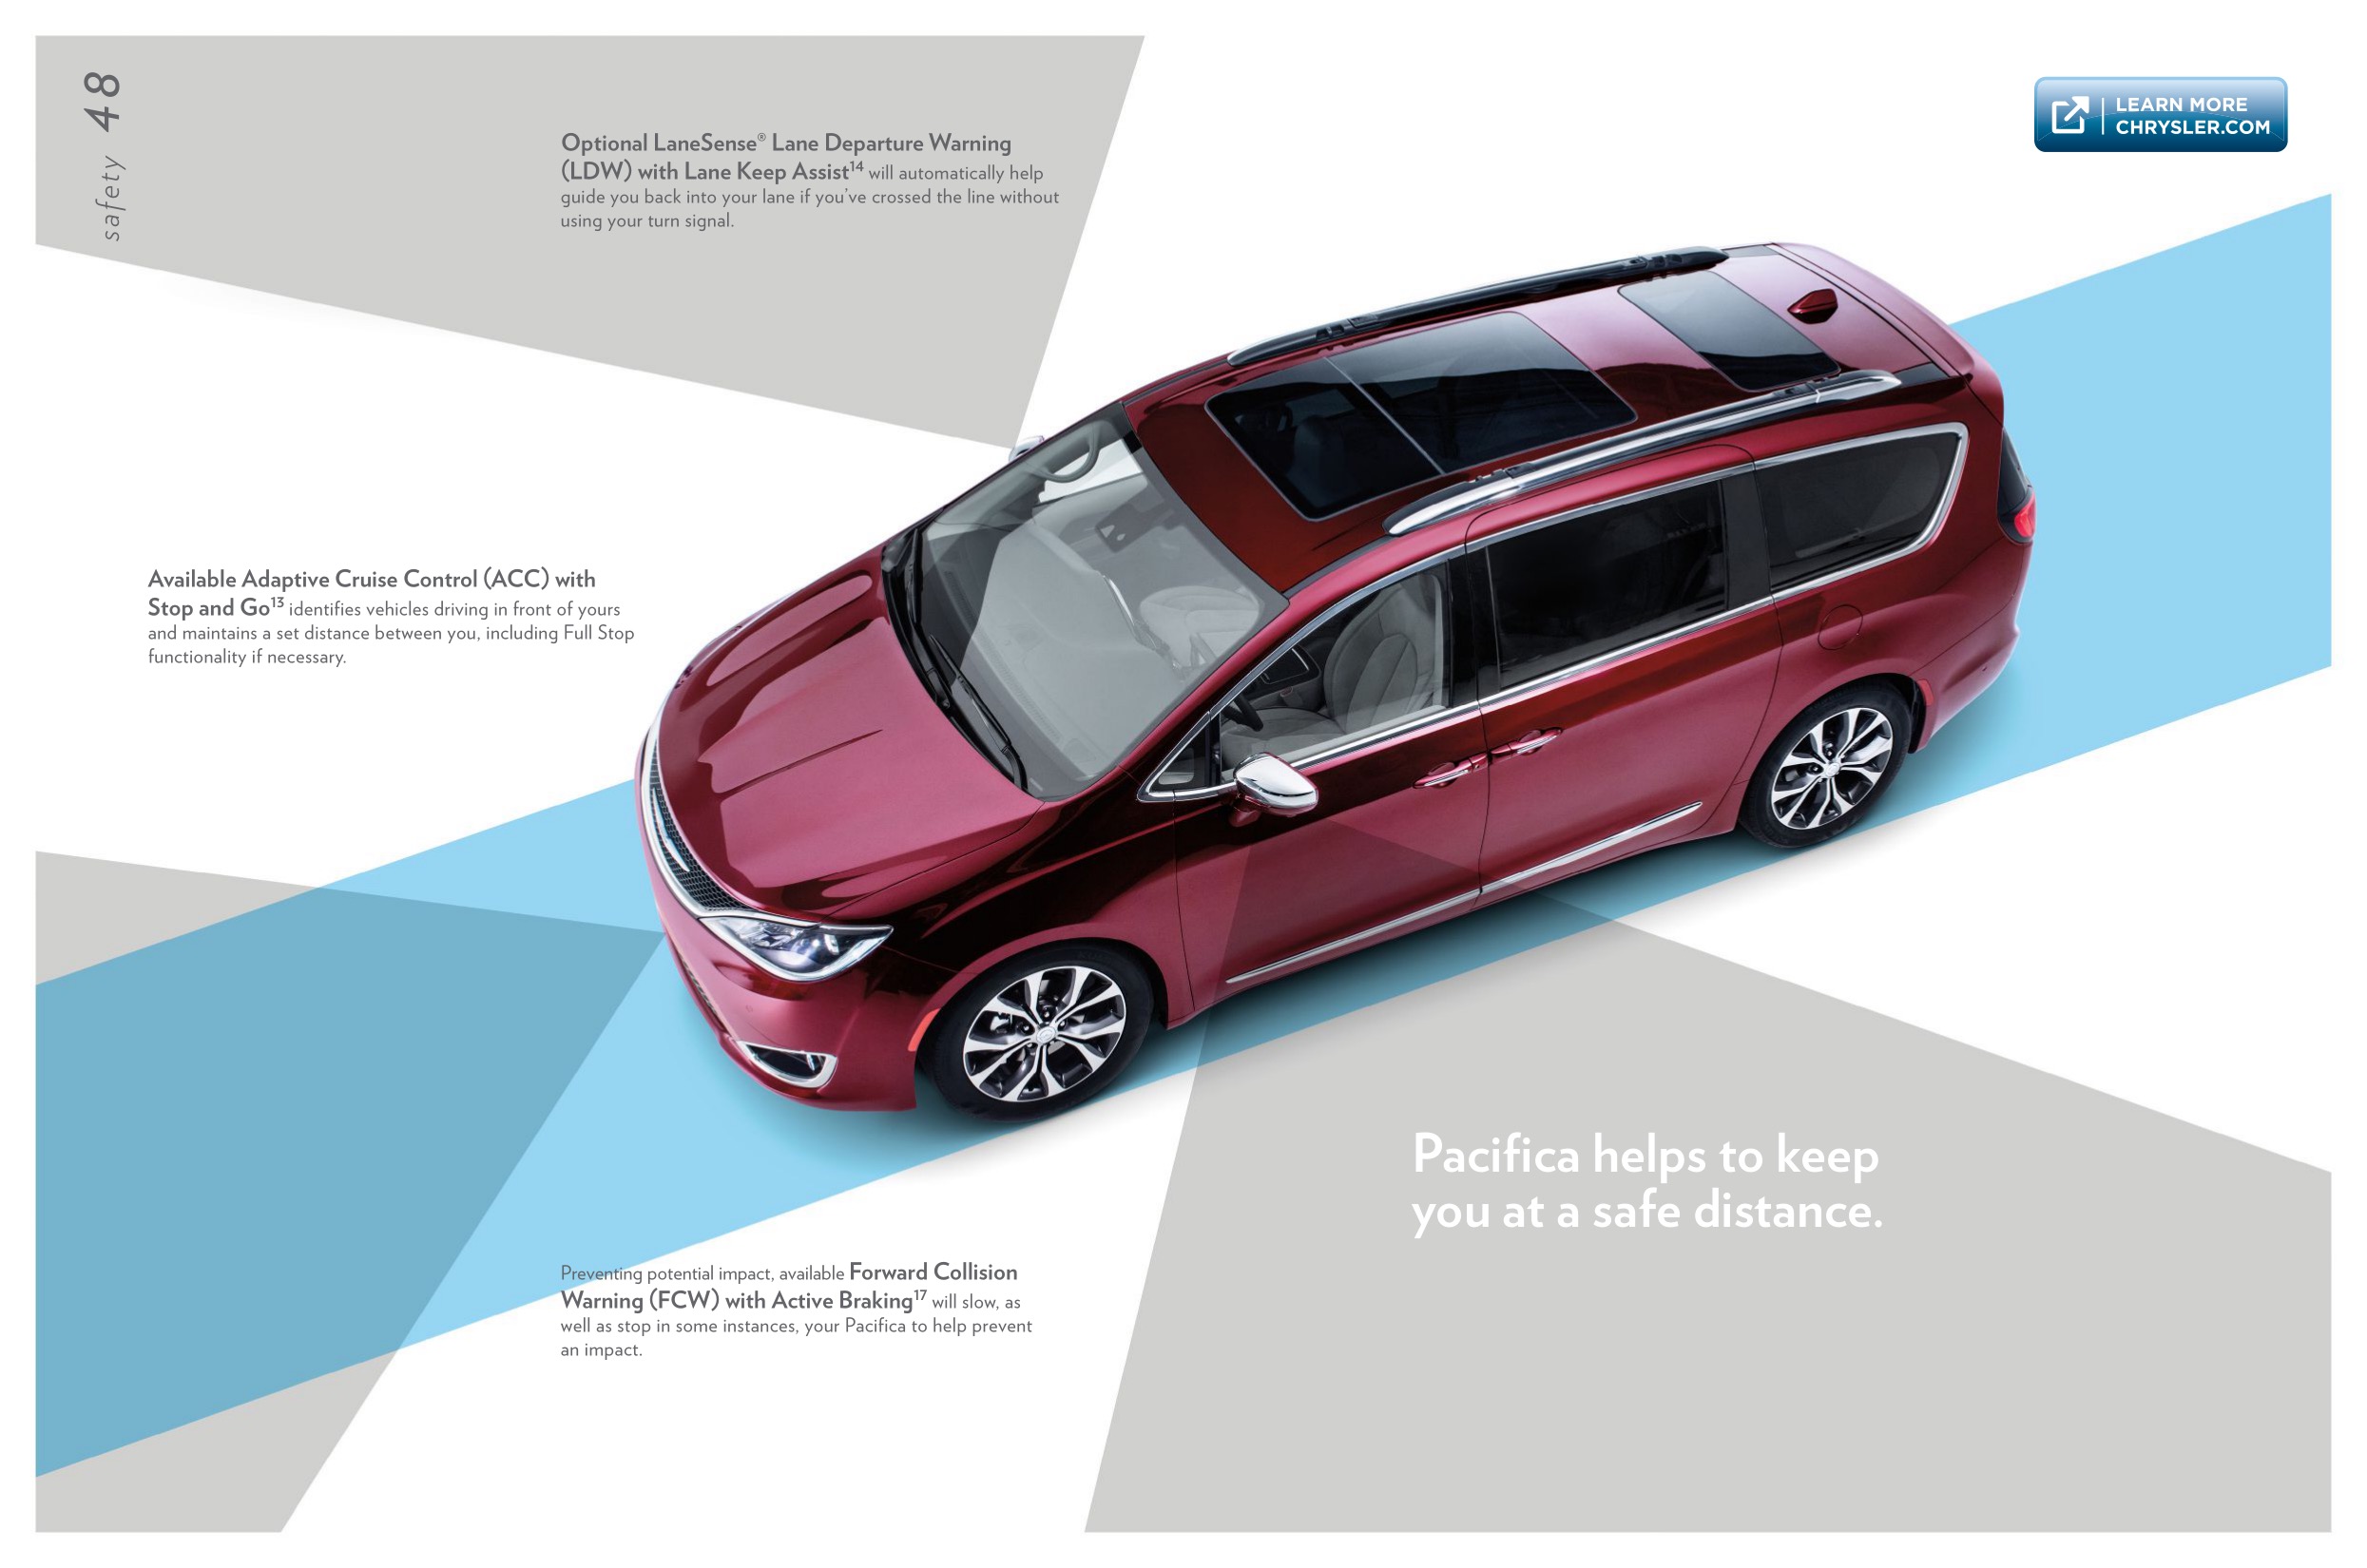 2017 Chrysler Pacifica Brochure Page 14